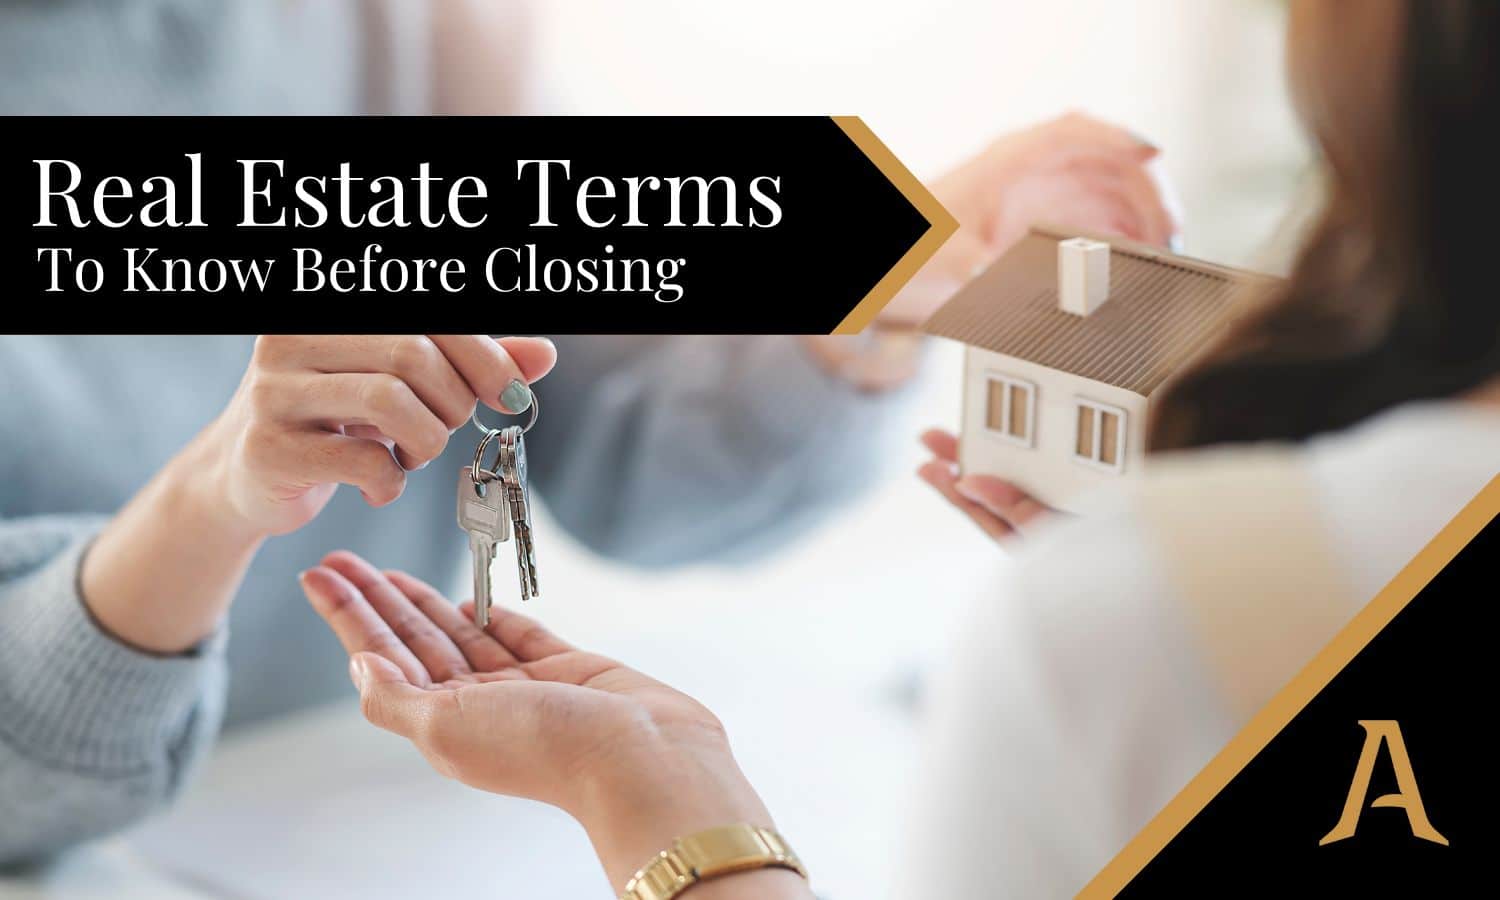 Real Estate Closing Terms to Know